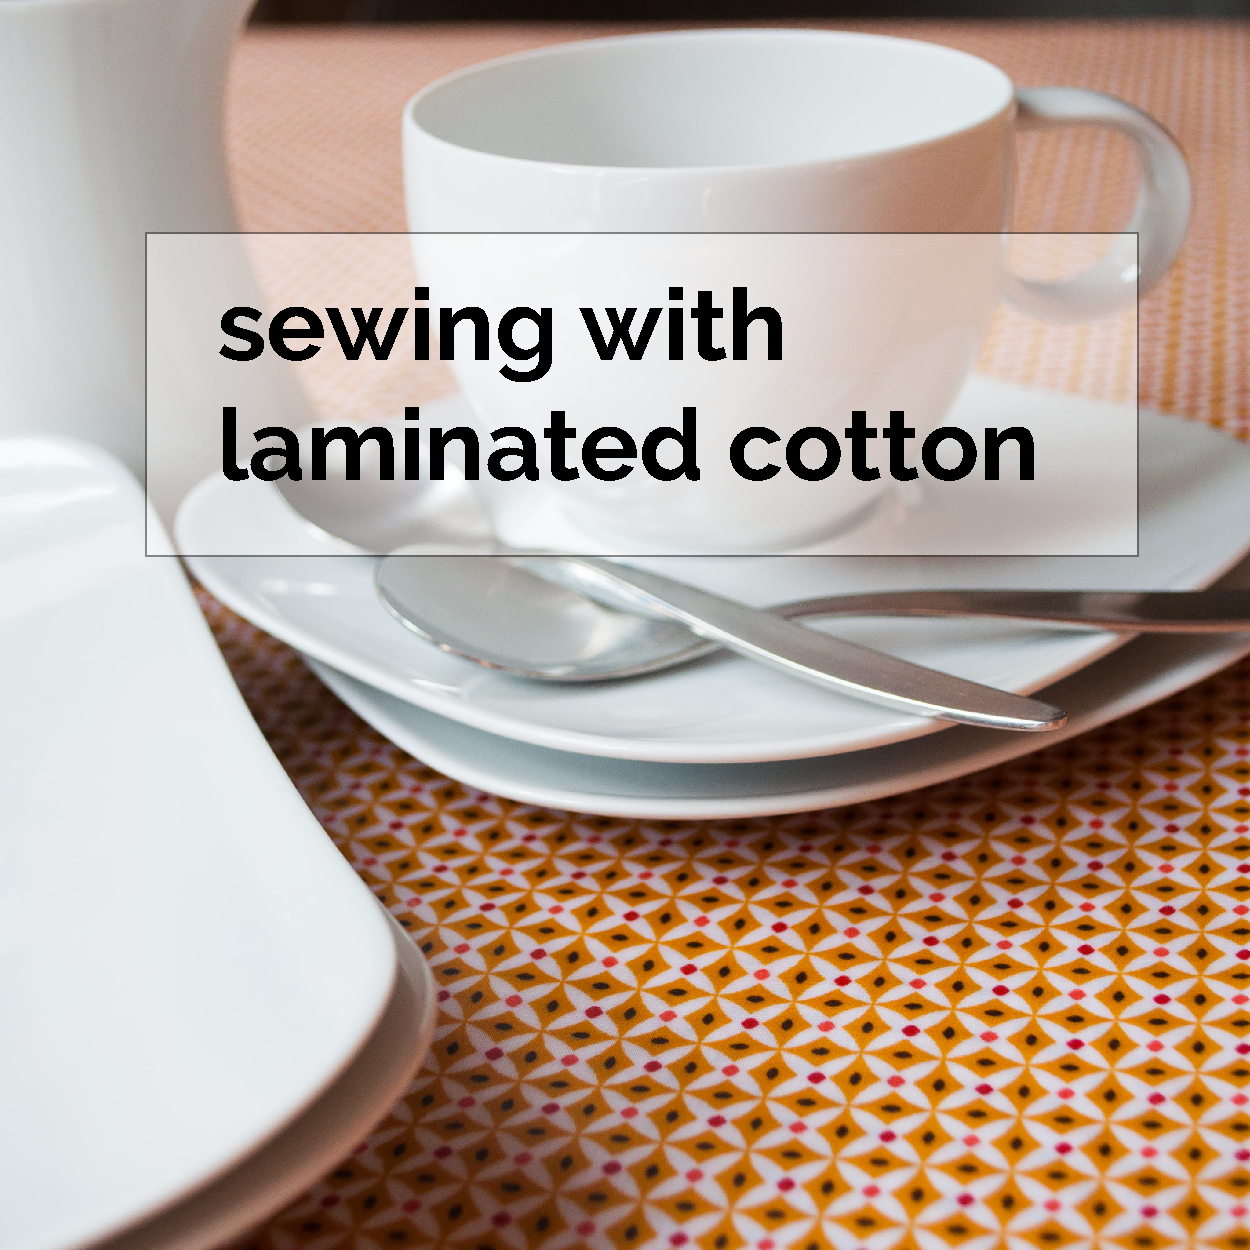 How to sew with laminated fabrics